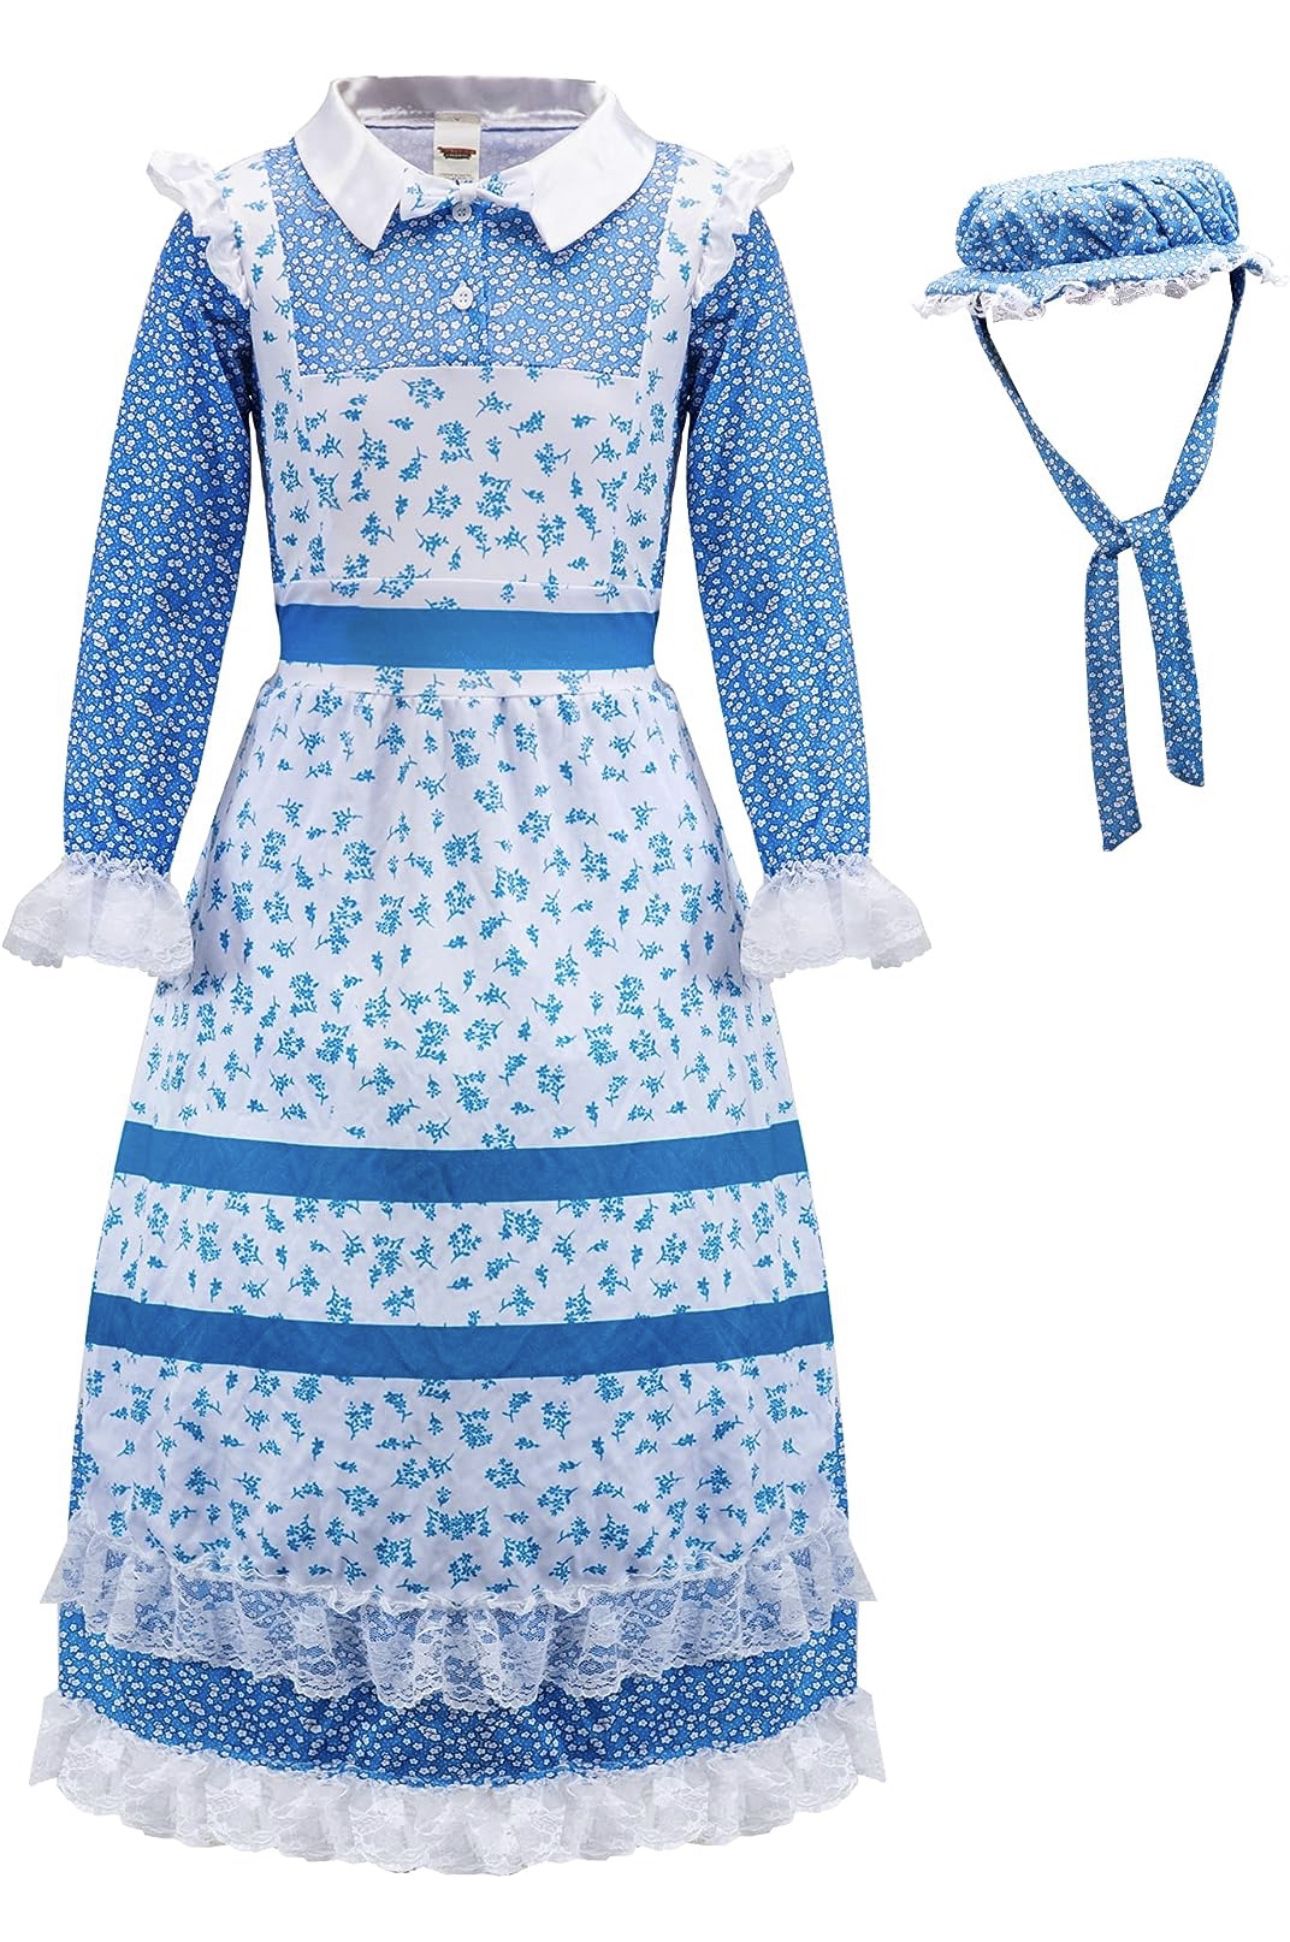 Girls, Pioneer, Early Days Costume For Halloween, Or Cosplay Little House On The Prairie XL